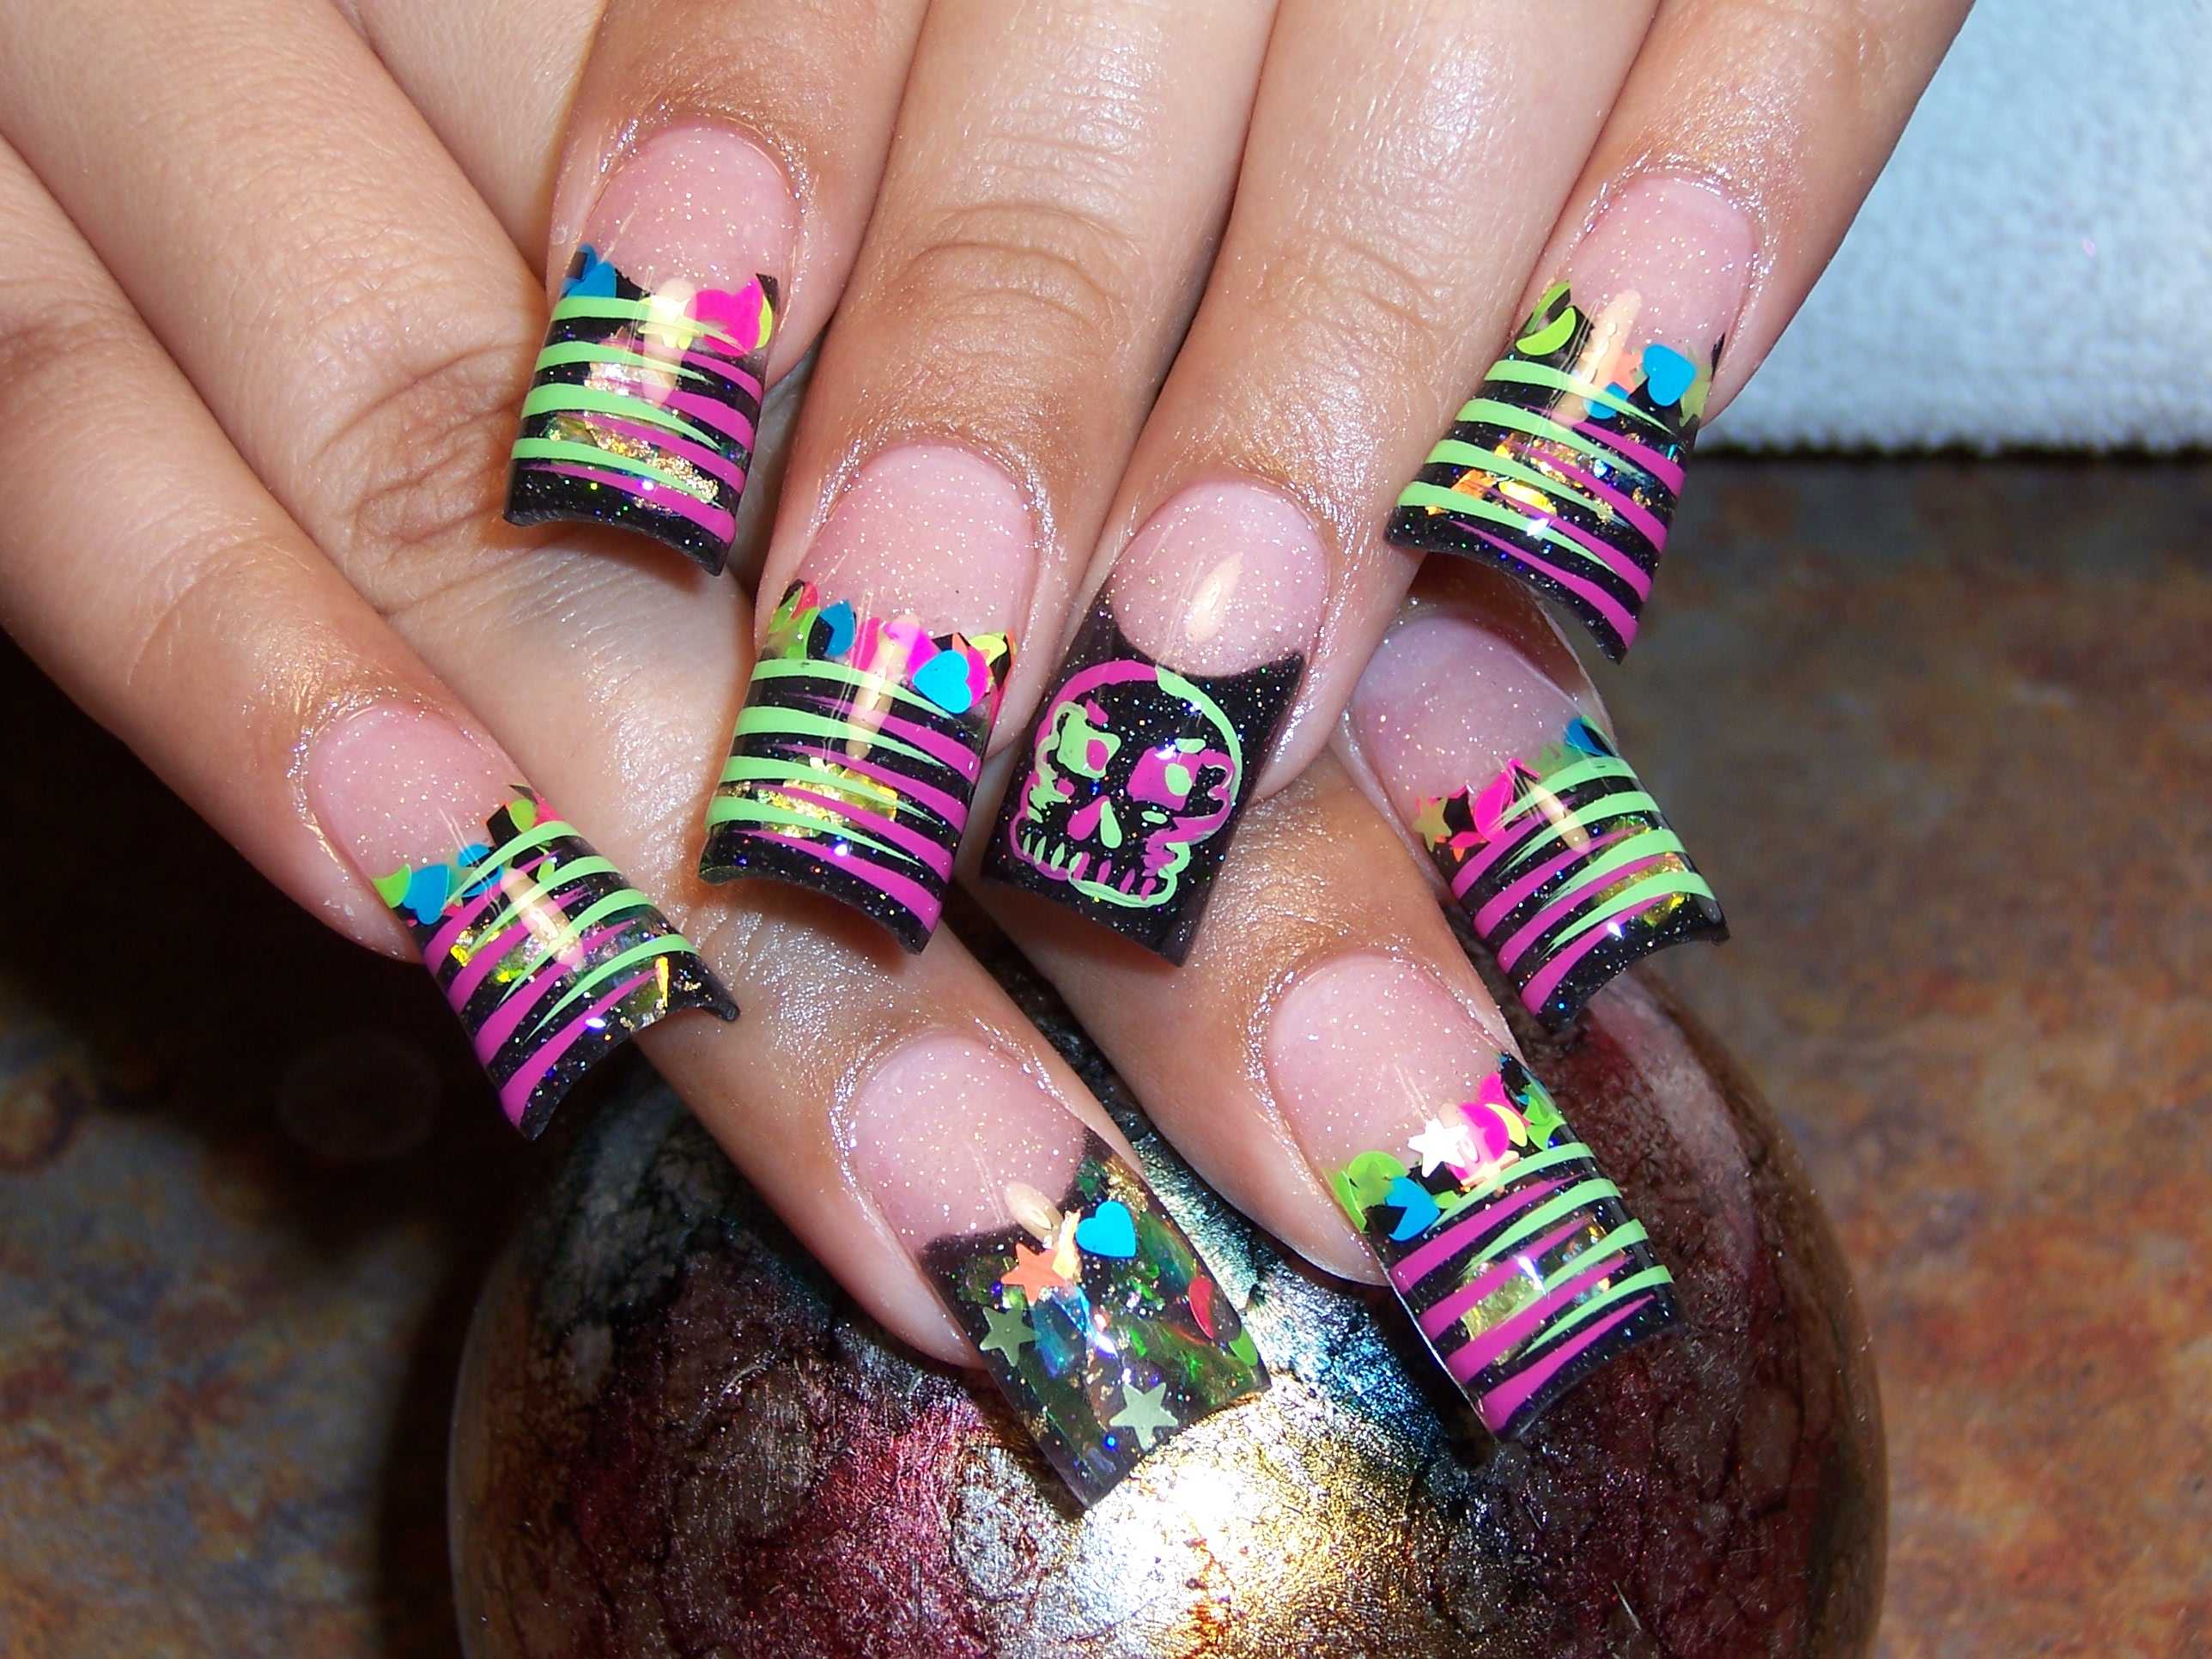 2. Vibrant and Colorful Nail Art Ideas - wide 5